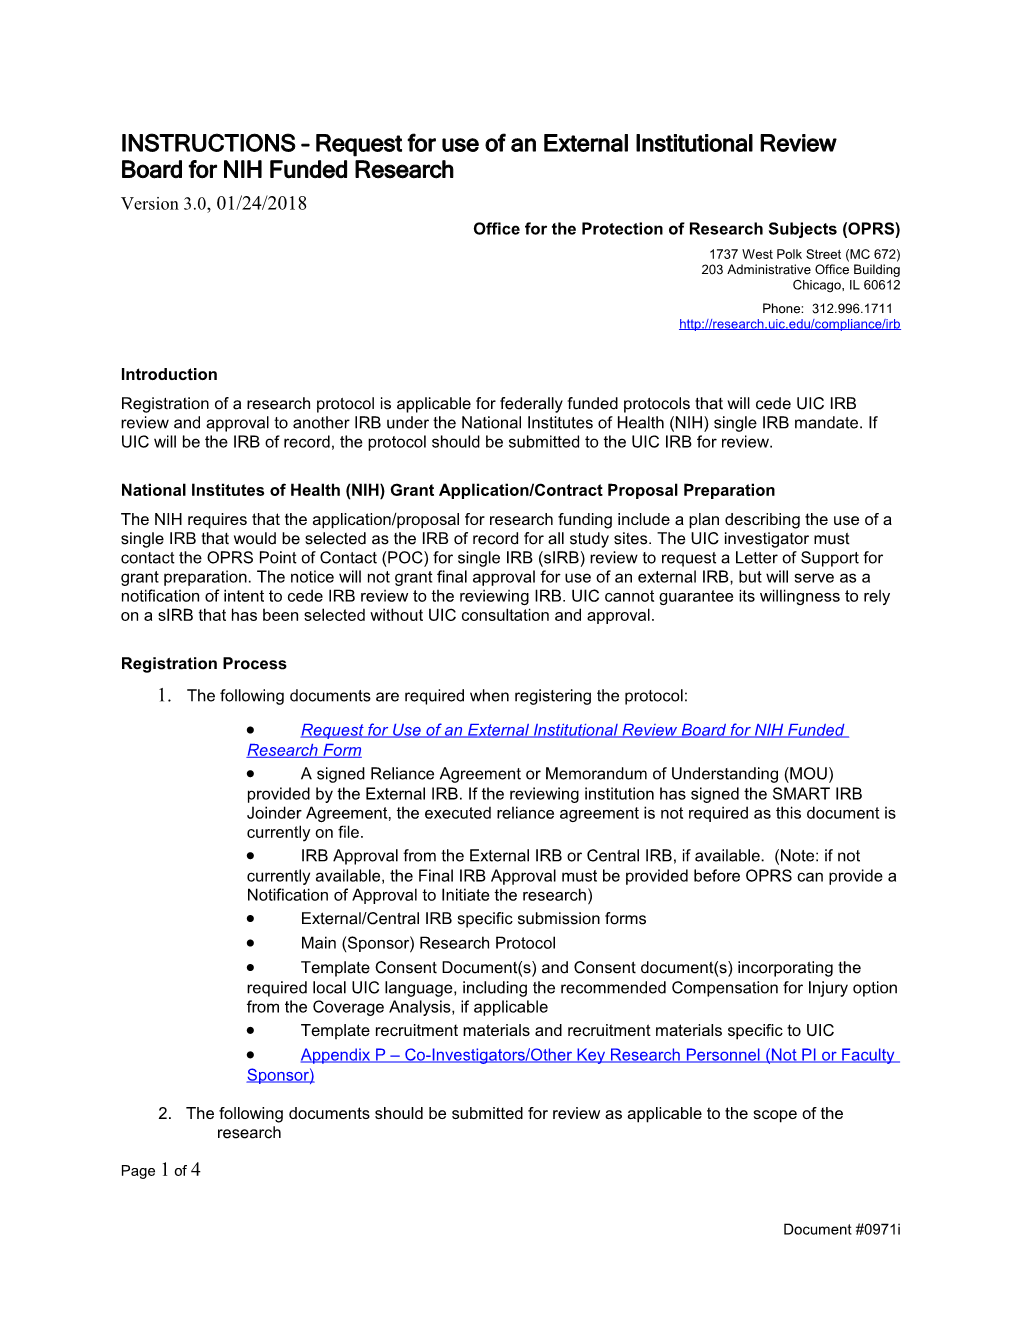 National Institutes of Health (NIH) Grant Application/Contract Proposal Preparation